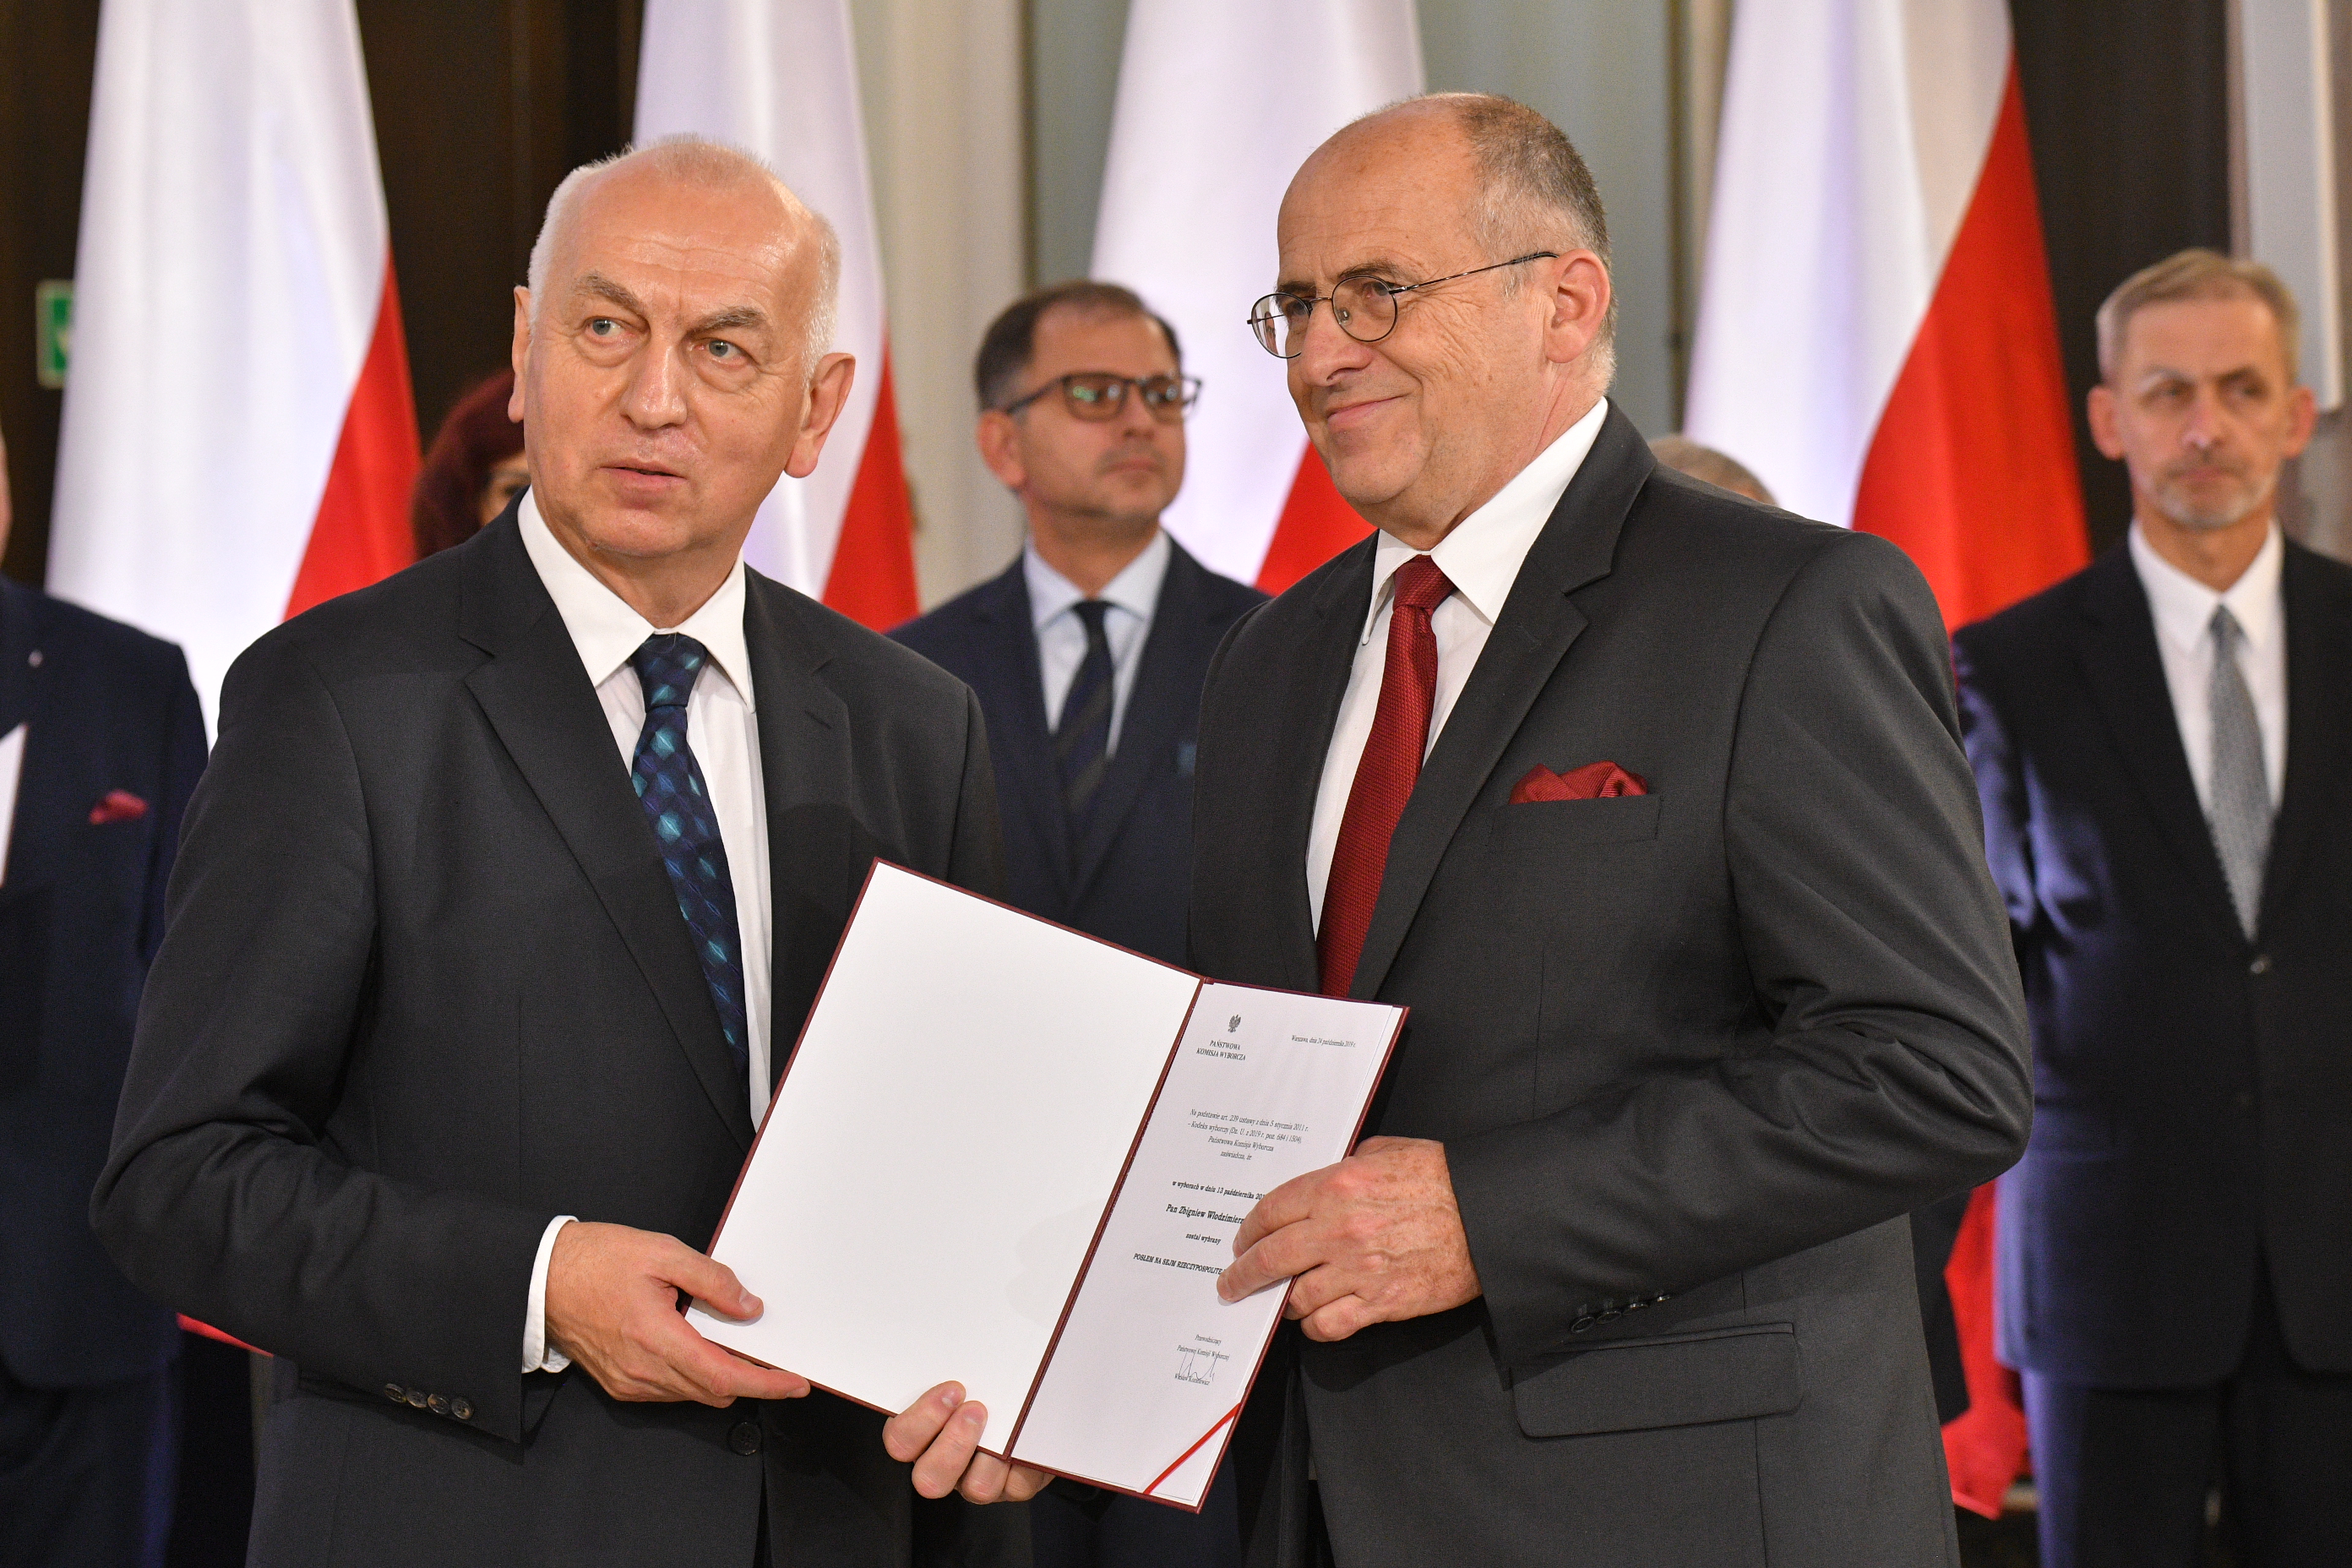 WI Daily News – New Foreign Minister of Poland